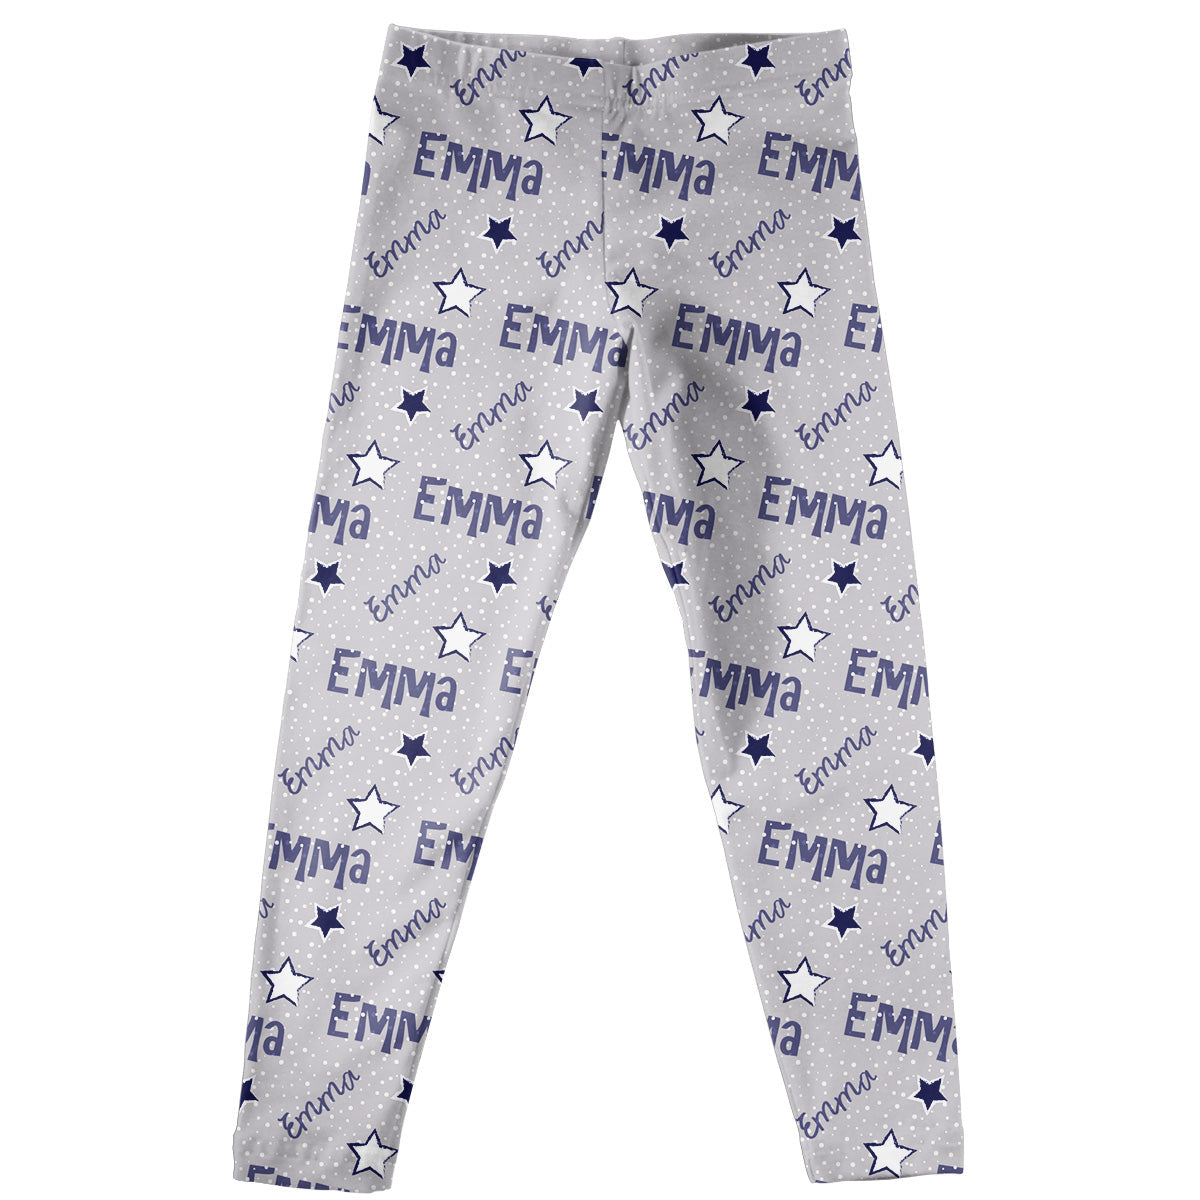 Girls gray and multic stars leggings with name - Wimziy&Co.